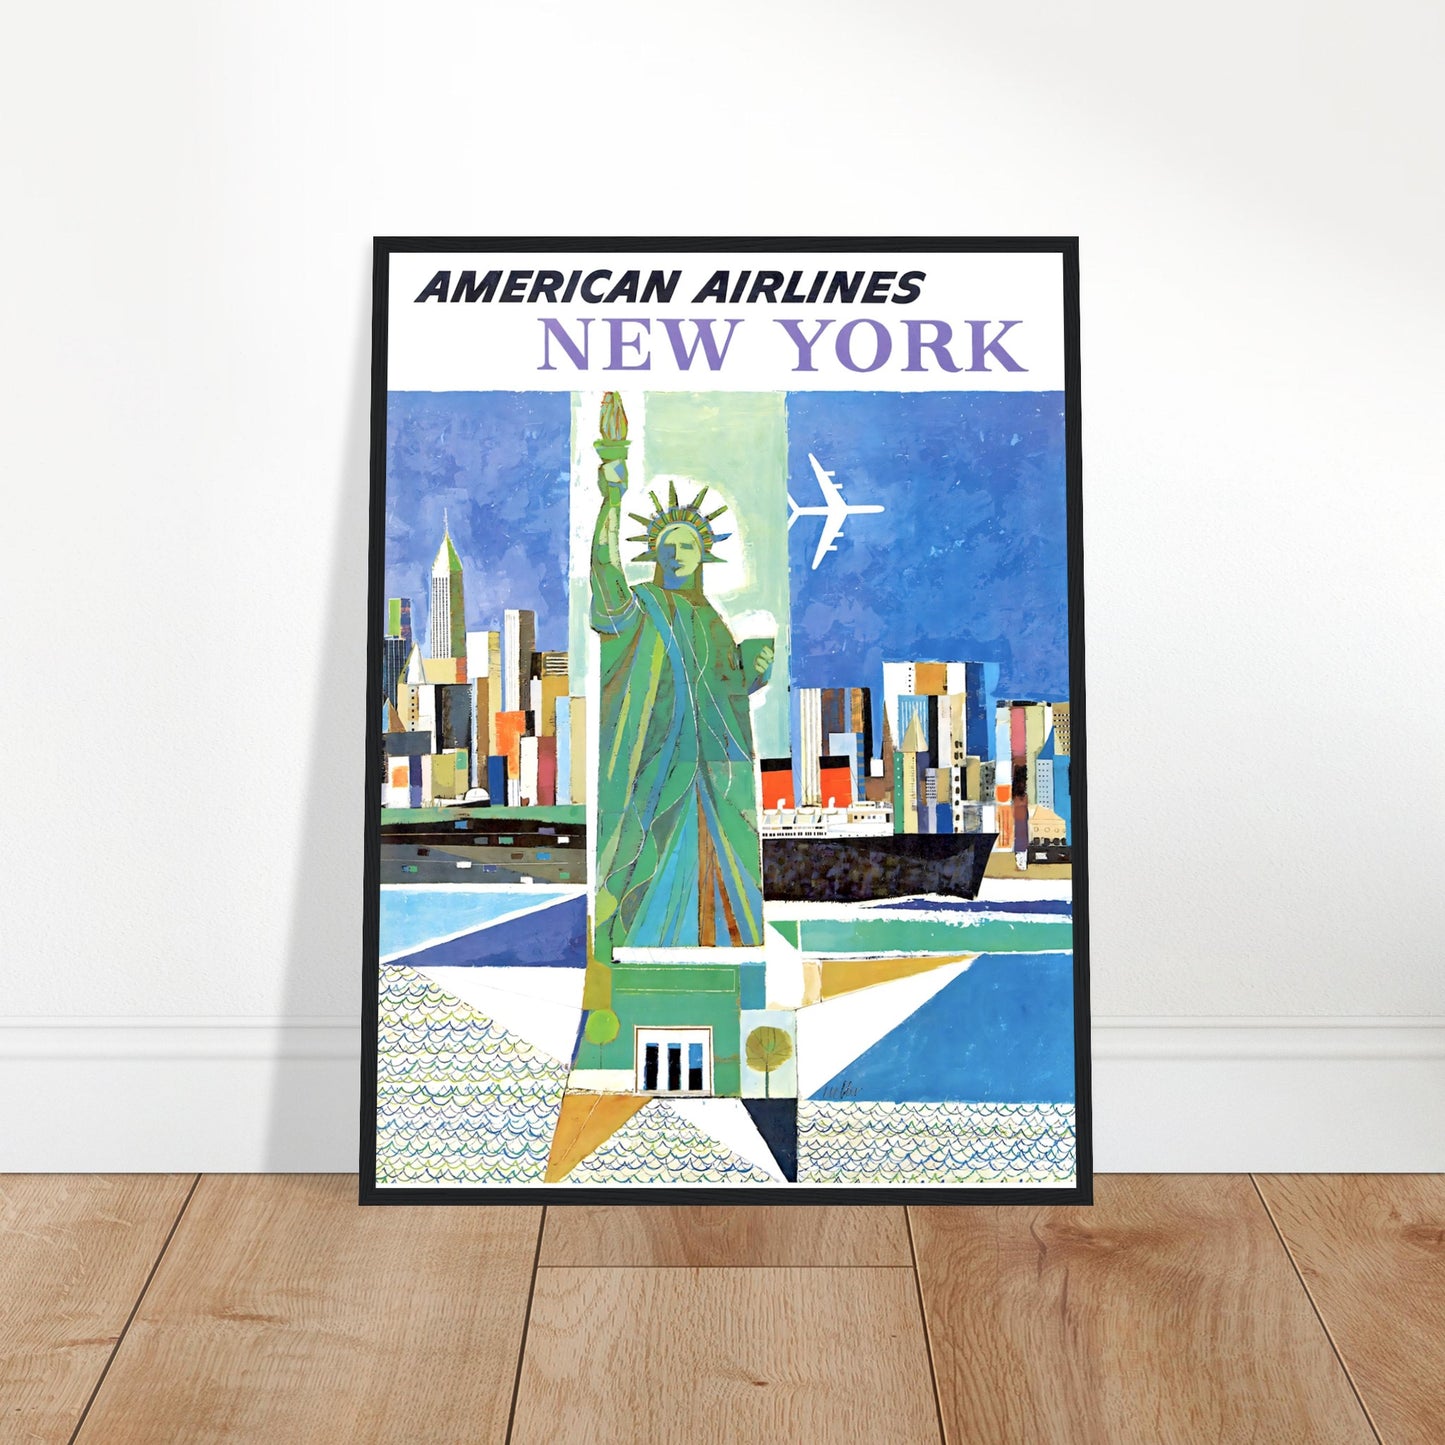 American Airlines Vintage Poster Reprint on Premium Matte Paper - Posterify